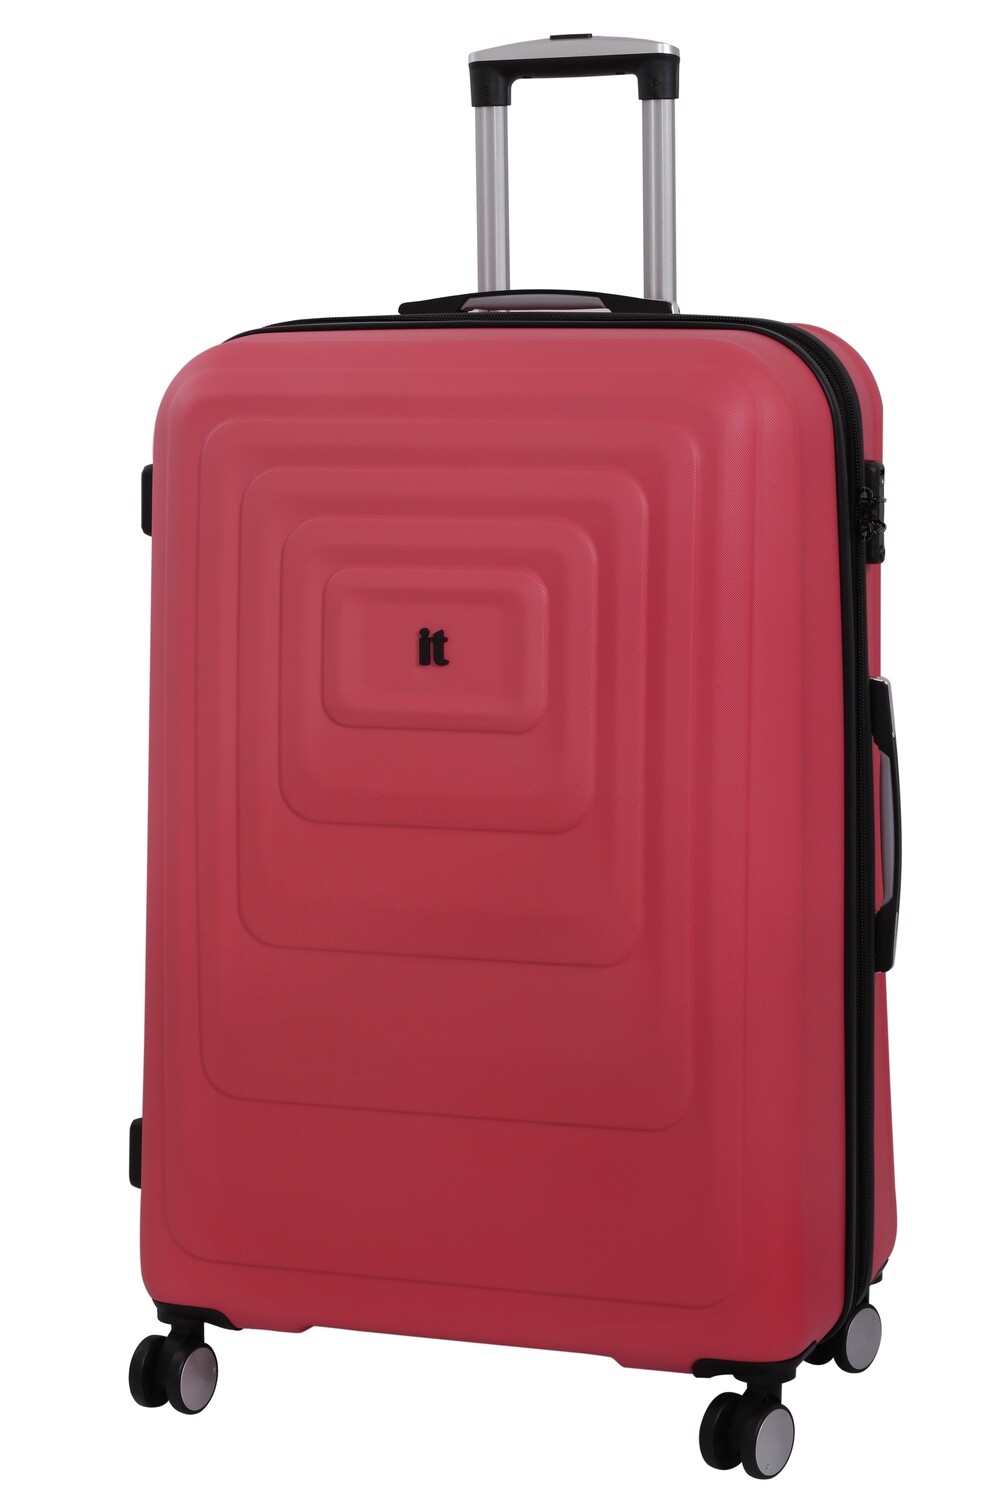 IT LUGGAGE MESMERIZE 30" STRONG TROLLEY CAYENNE